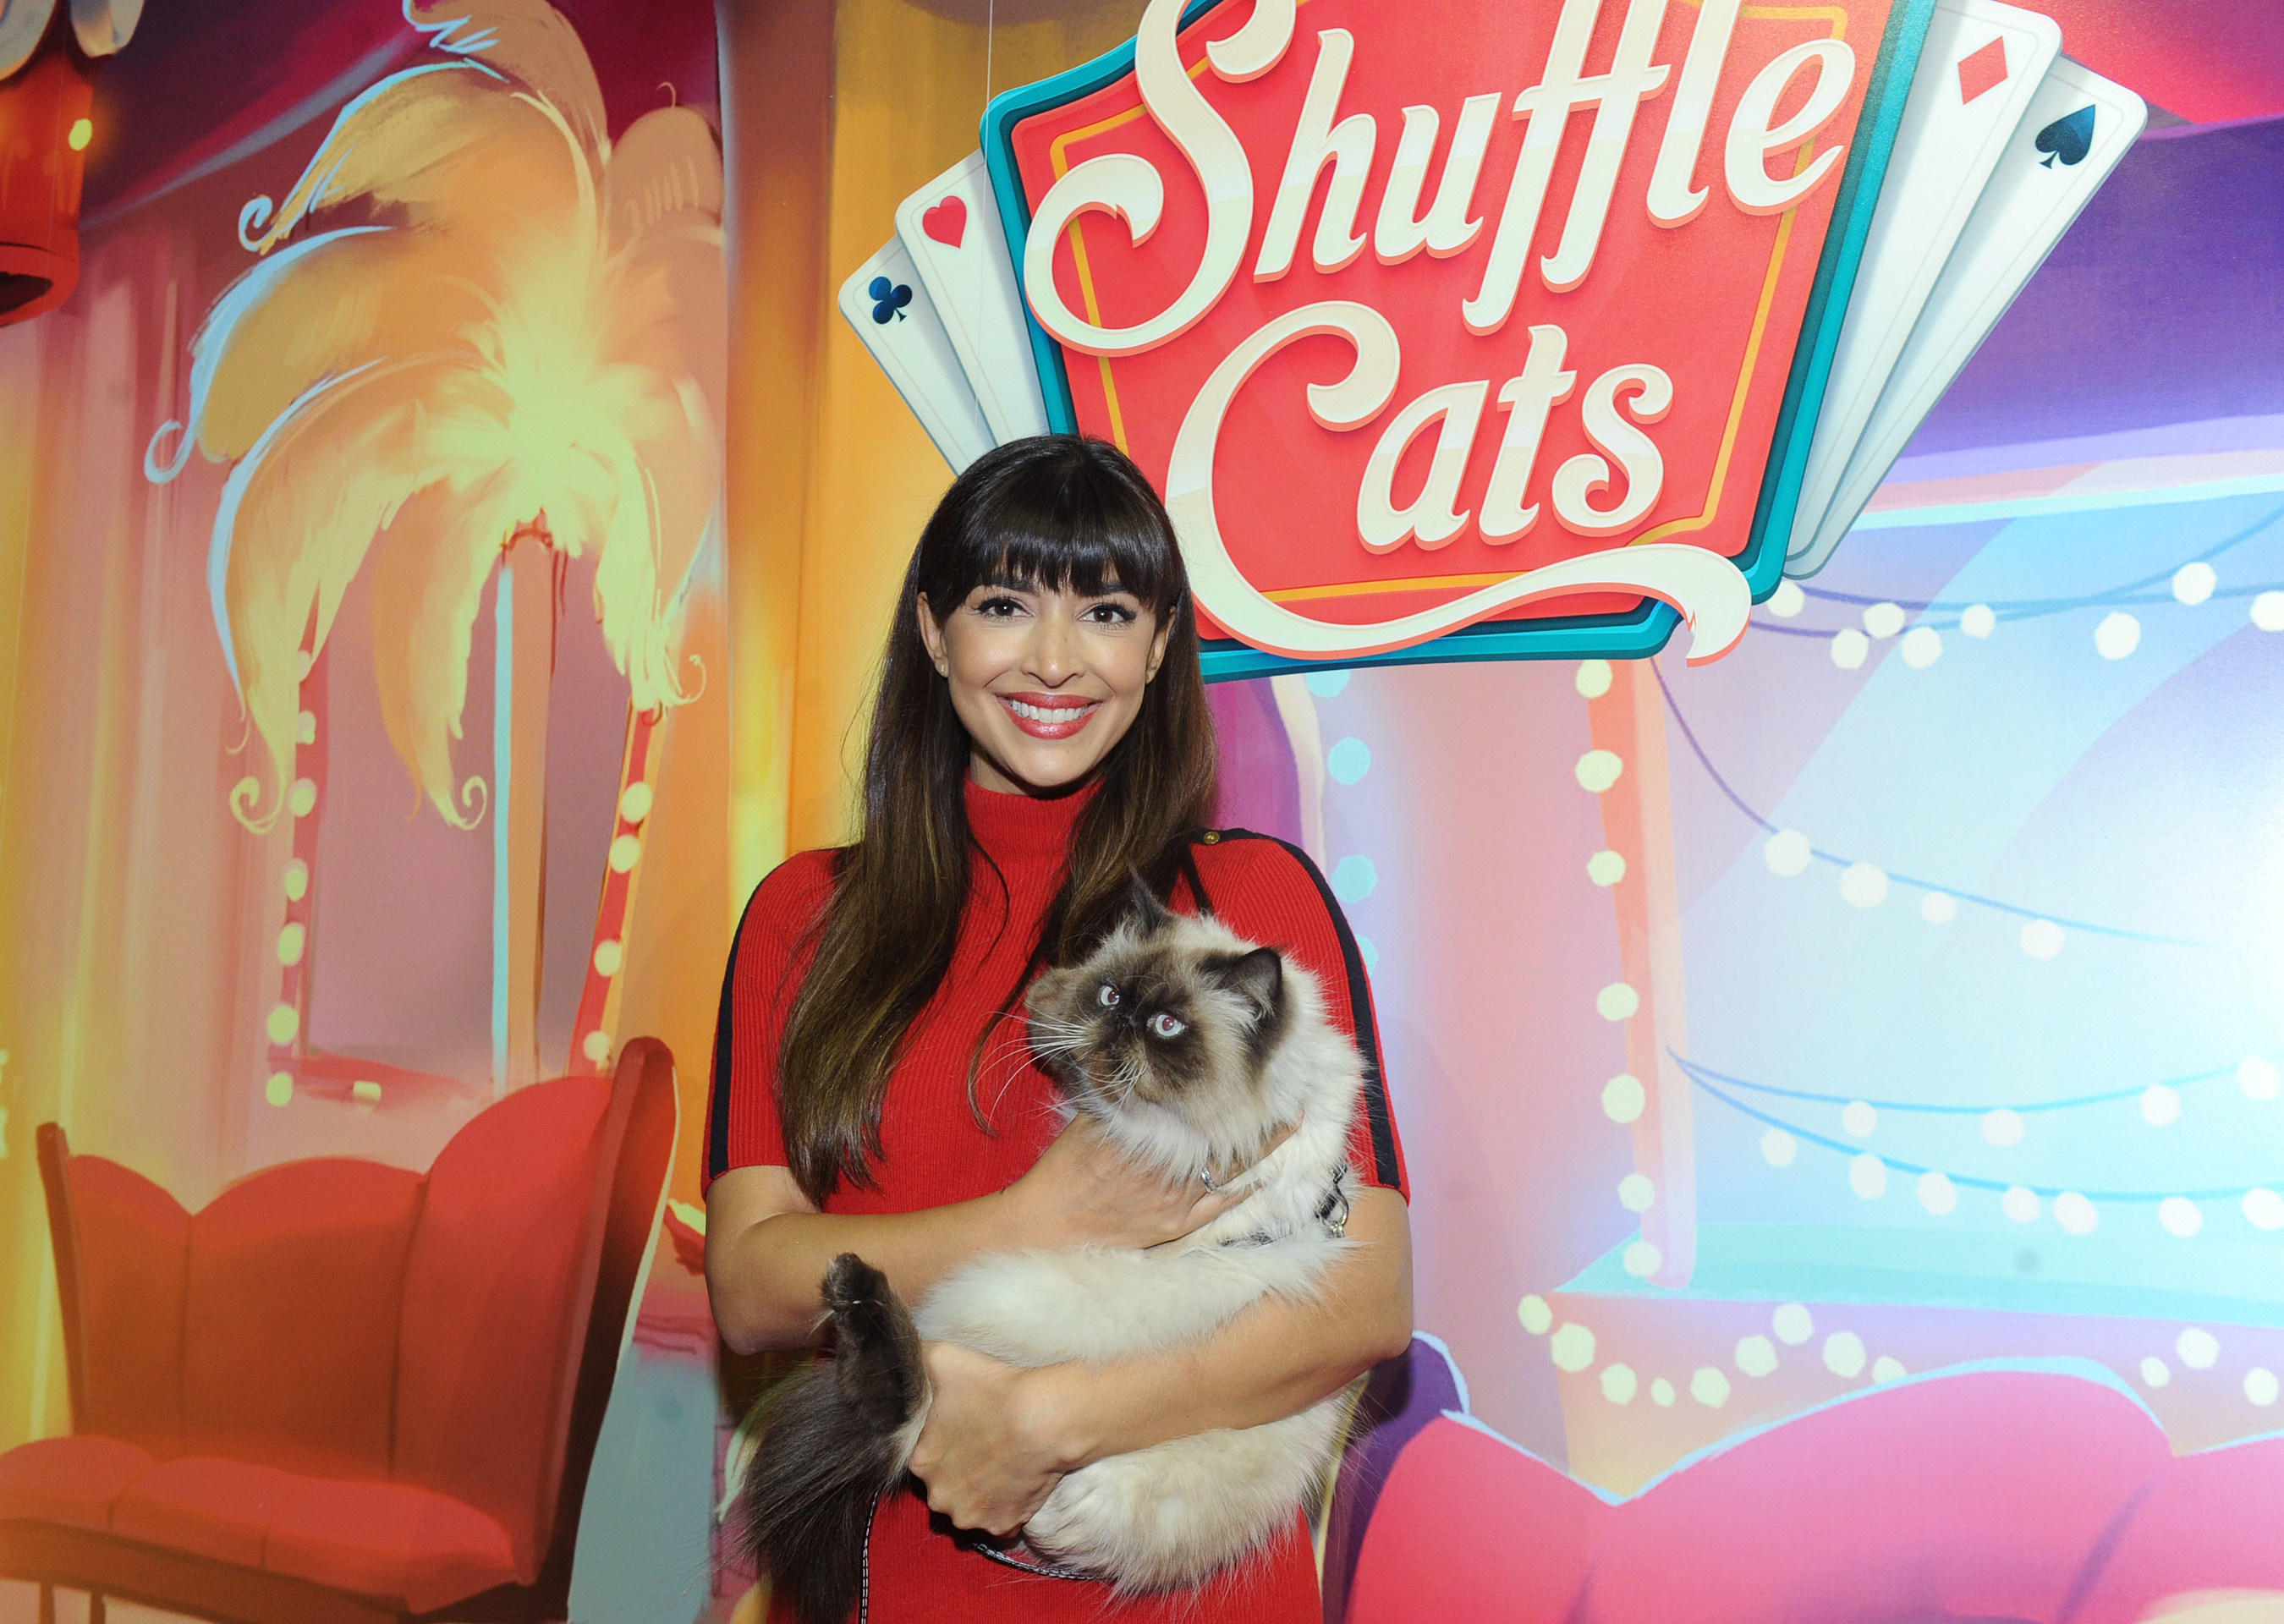 Actress Hannah Simone poses with Wylie Coyote Super Genius, the winner of America's Next Shuffle Cat contest, after a live cat-walk in New York, Tuesday, Dec. 6, 2016.  Wylie will be featured in Shuffle Cats, the new mobile game from King.  (Photo by Diane Bondareff/Invision for King/ AP Images)